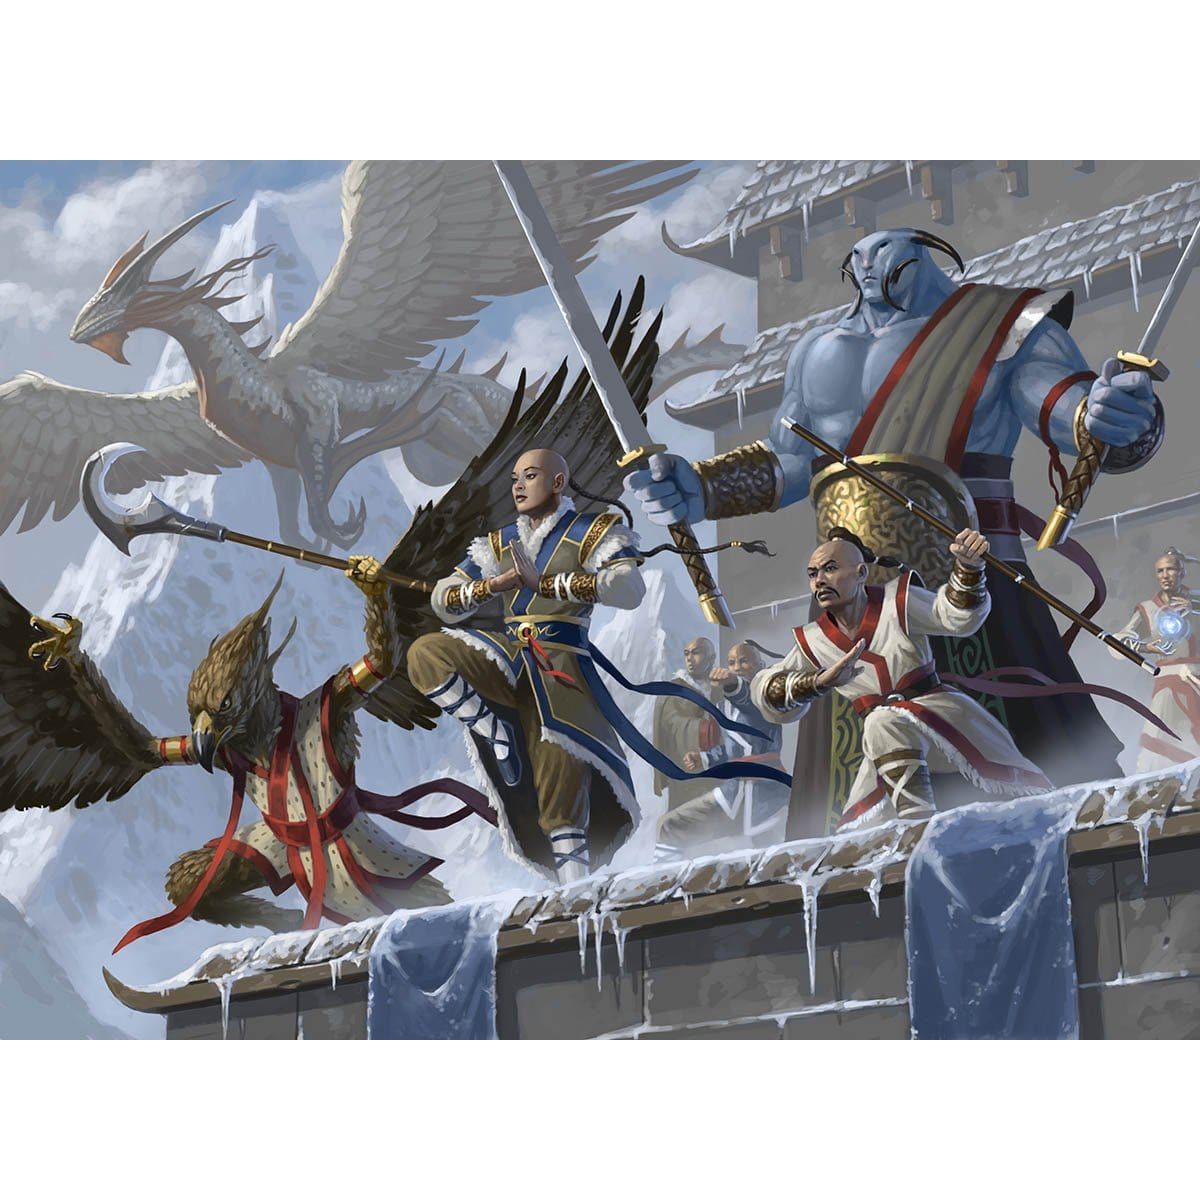 Ojutai&#39;s Command Print - Print - Original Magic Art - Accessories for Magic the Gathering and other card games